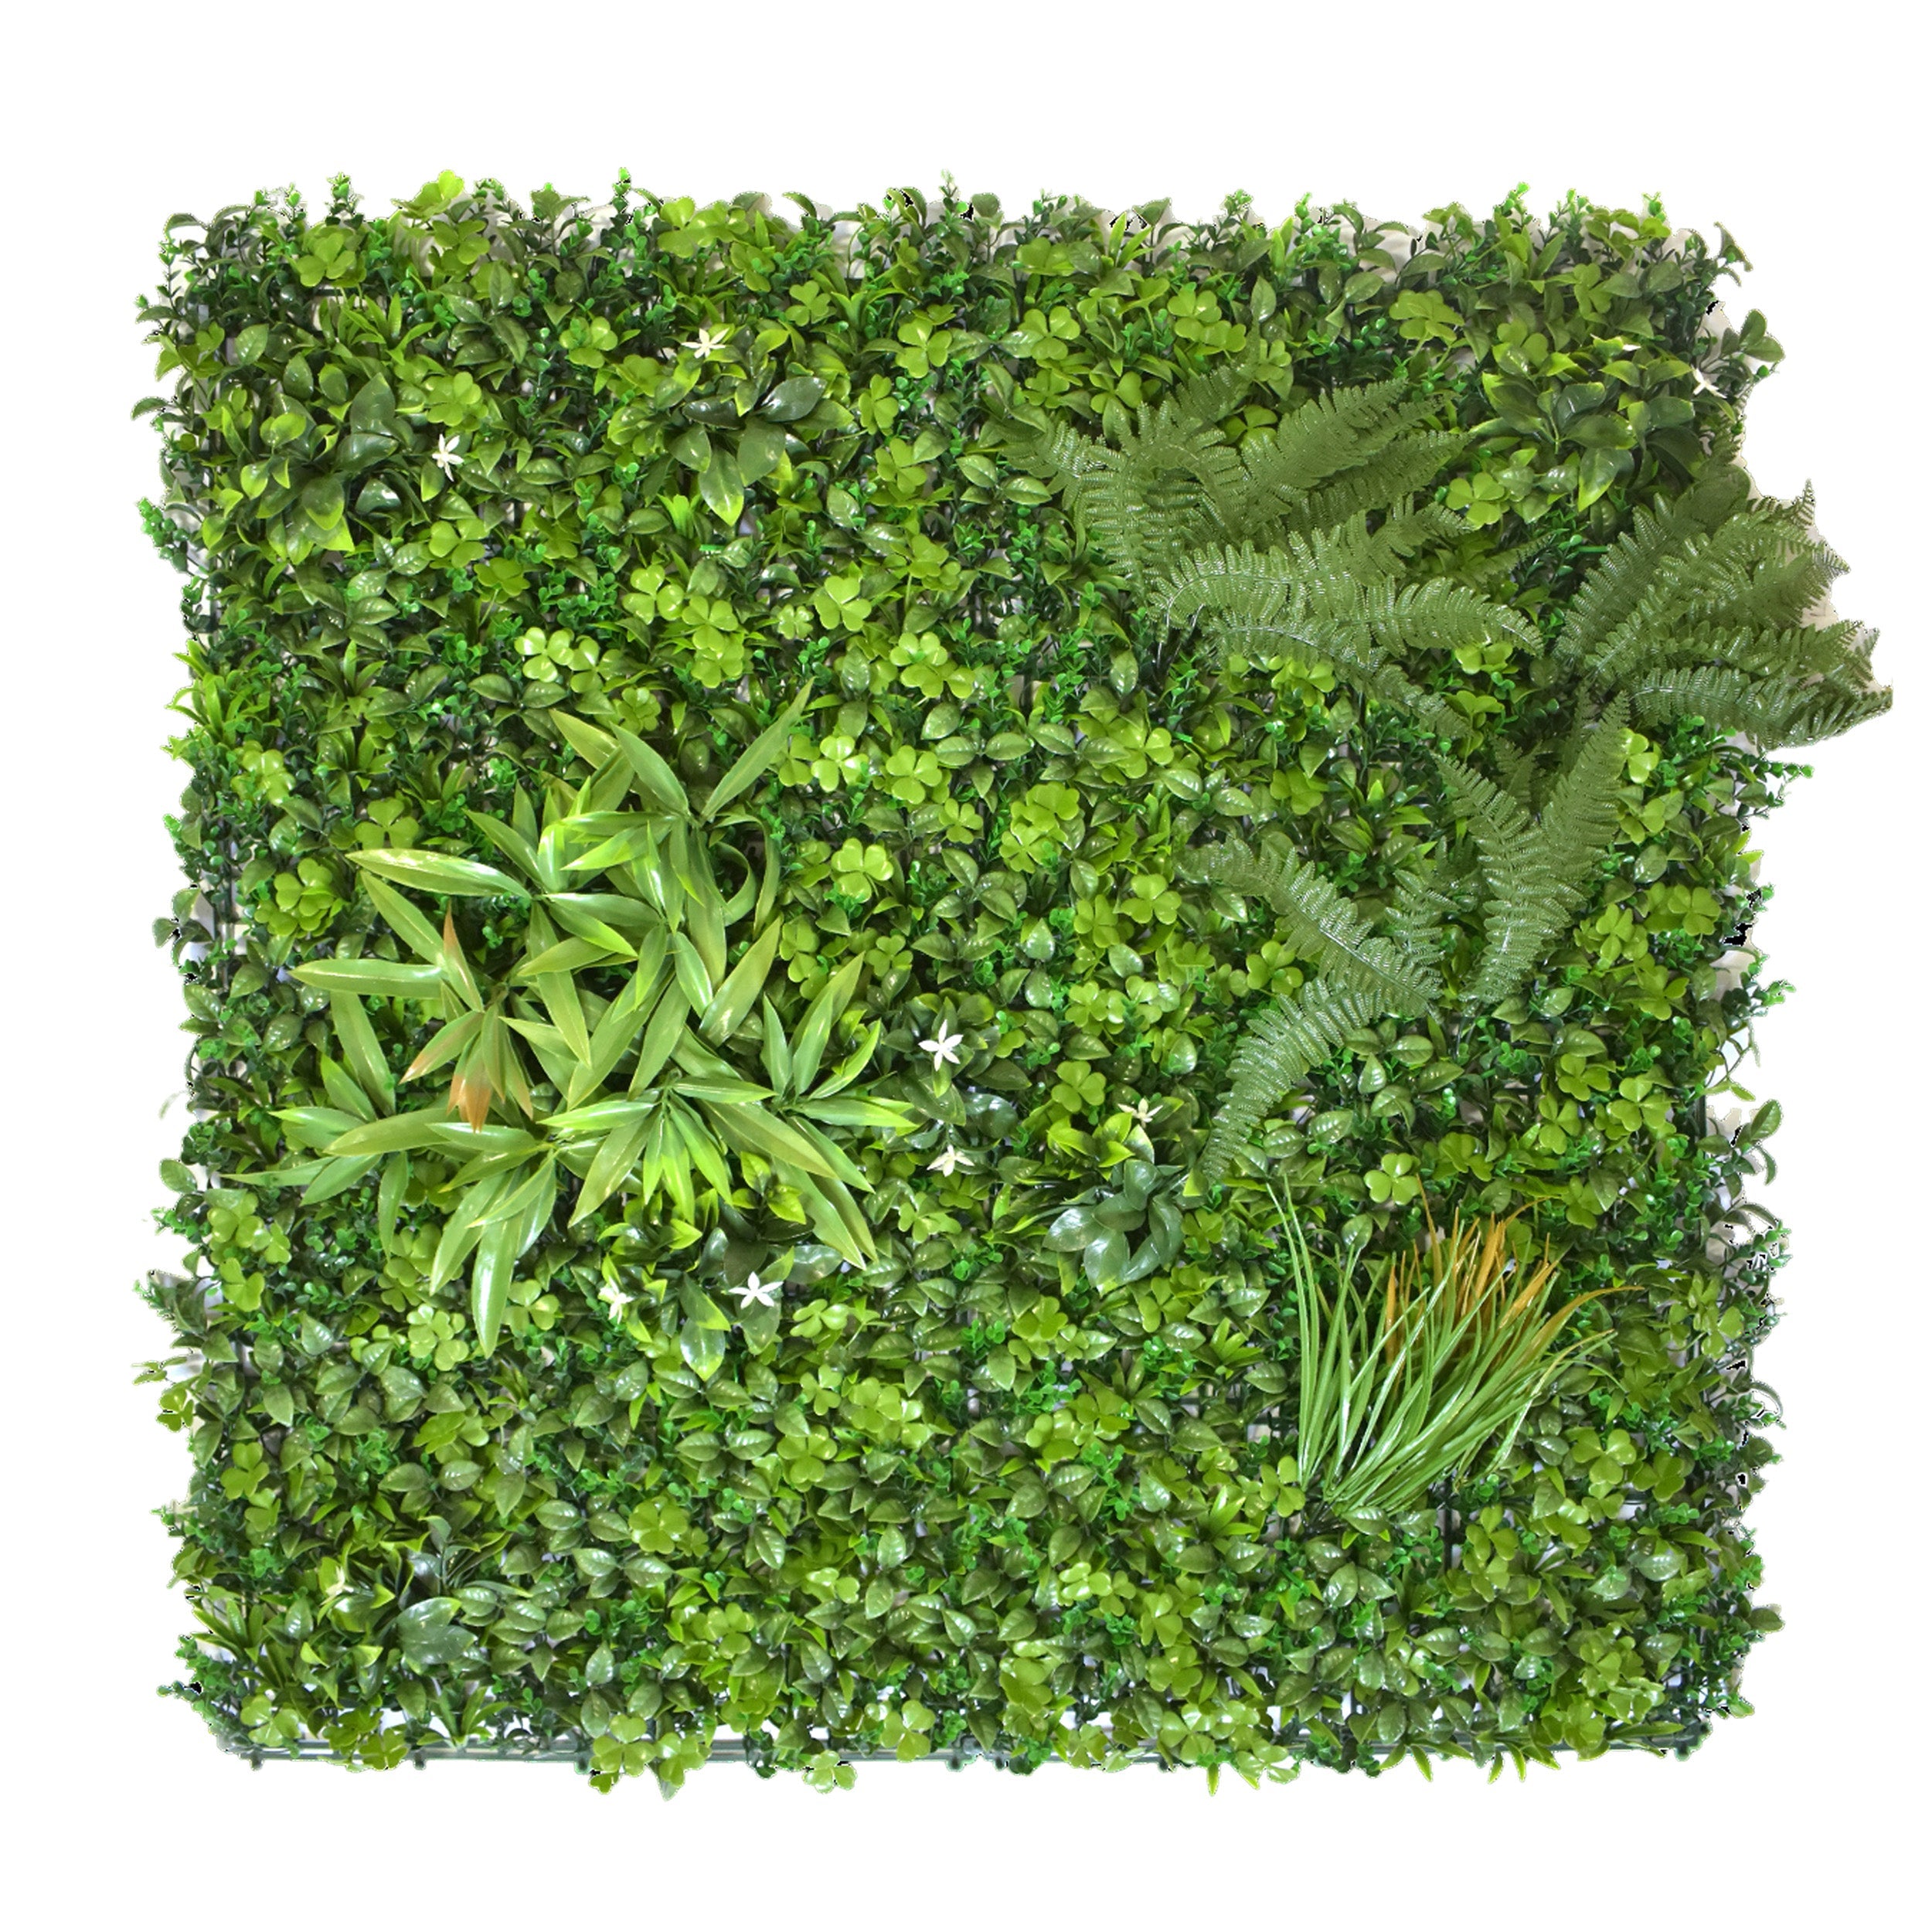 Aavana Greens Artificial Vertical Garden Wall Panel 100X100 CM For Home & Office Decoration 100% UV Indoor And Outdoor Use Option 22